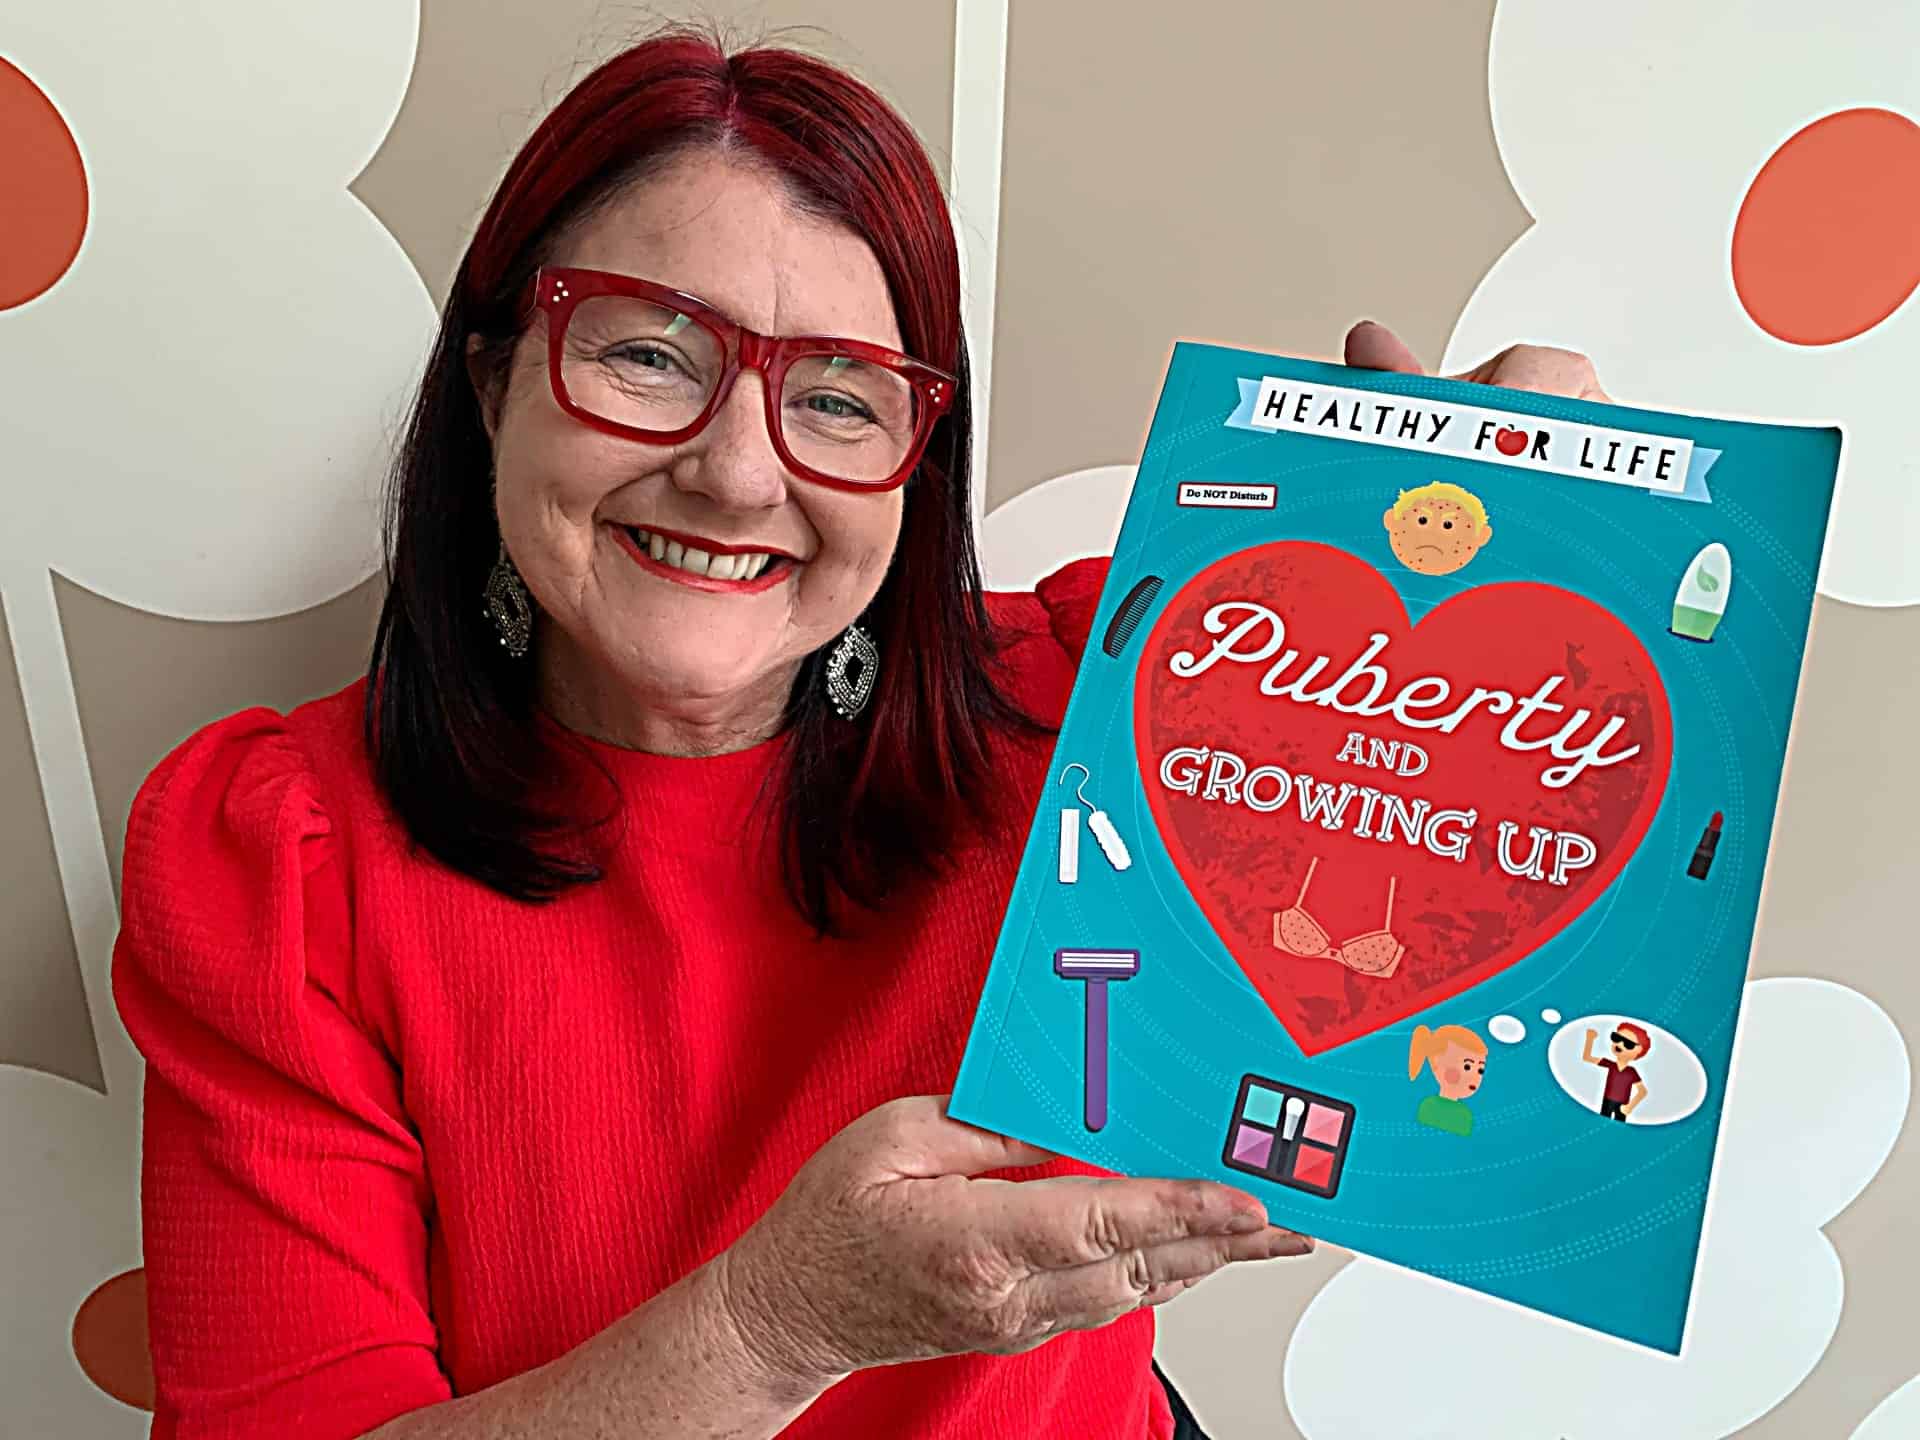 Puberty and Growing Up - Book review by Rowena Thomas | 'Amazing Me'